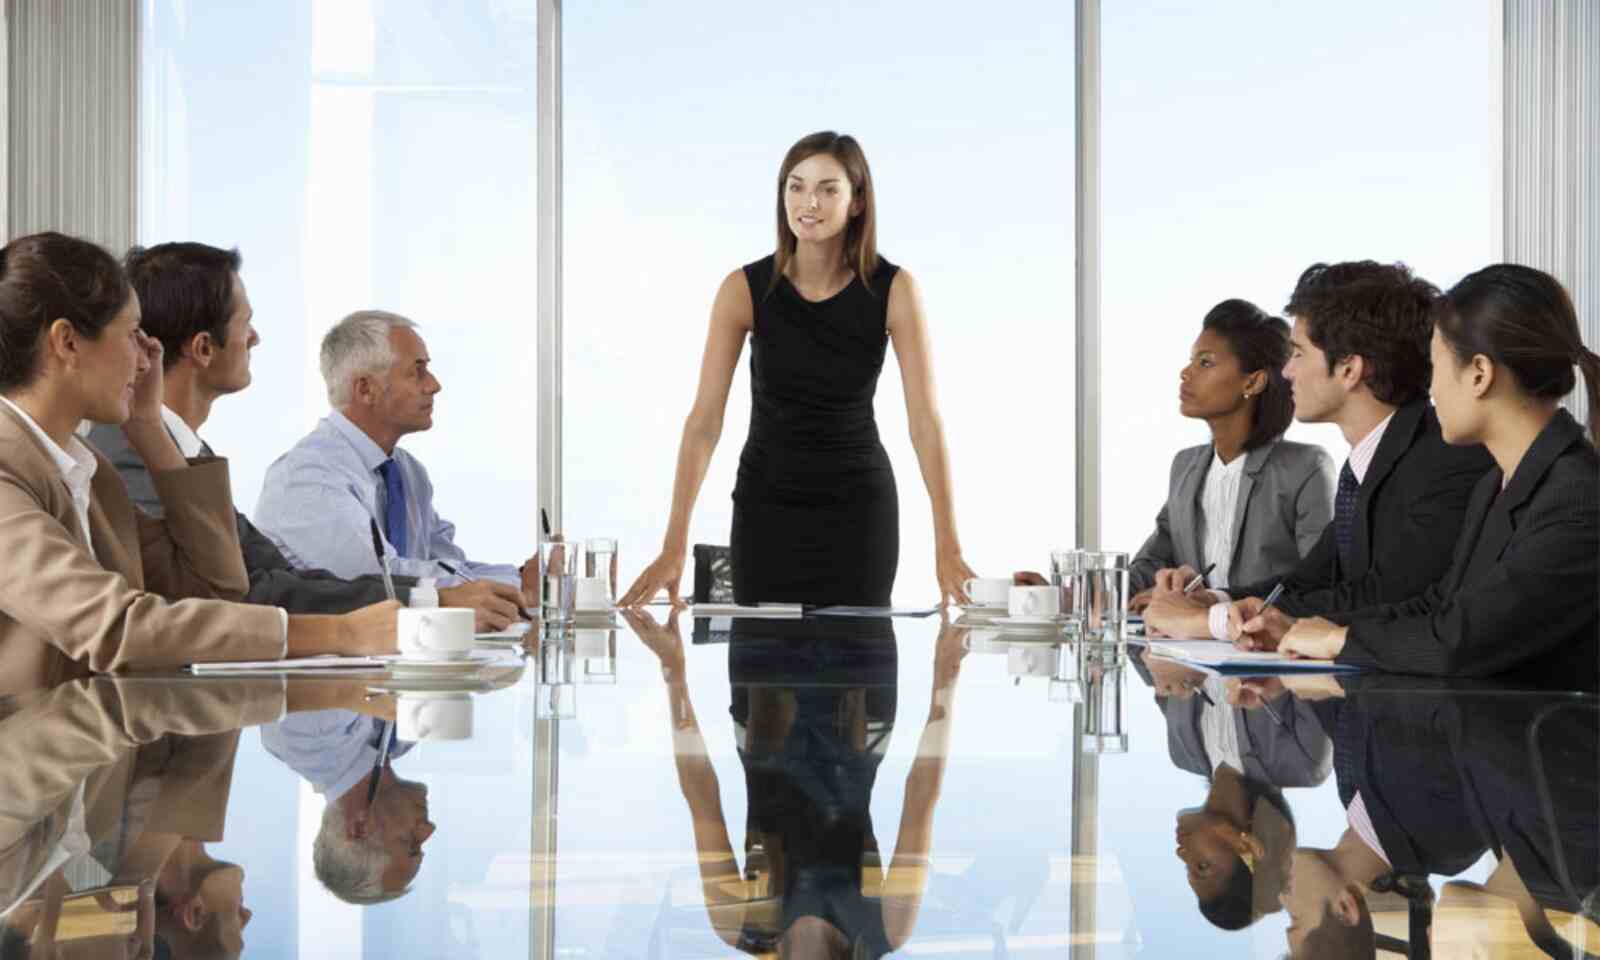 Women now hold 32% of top leadership positions